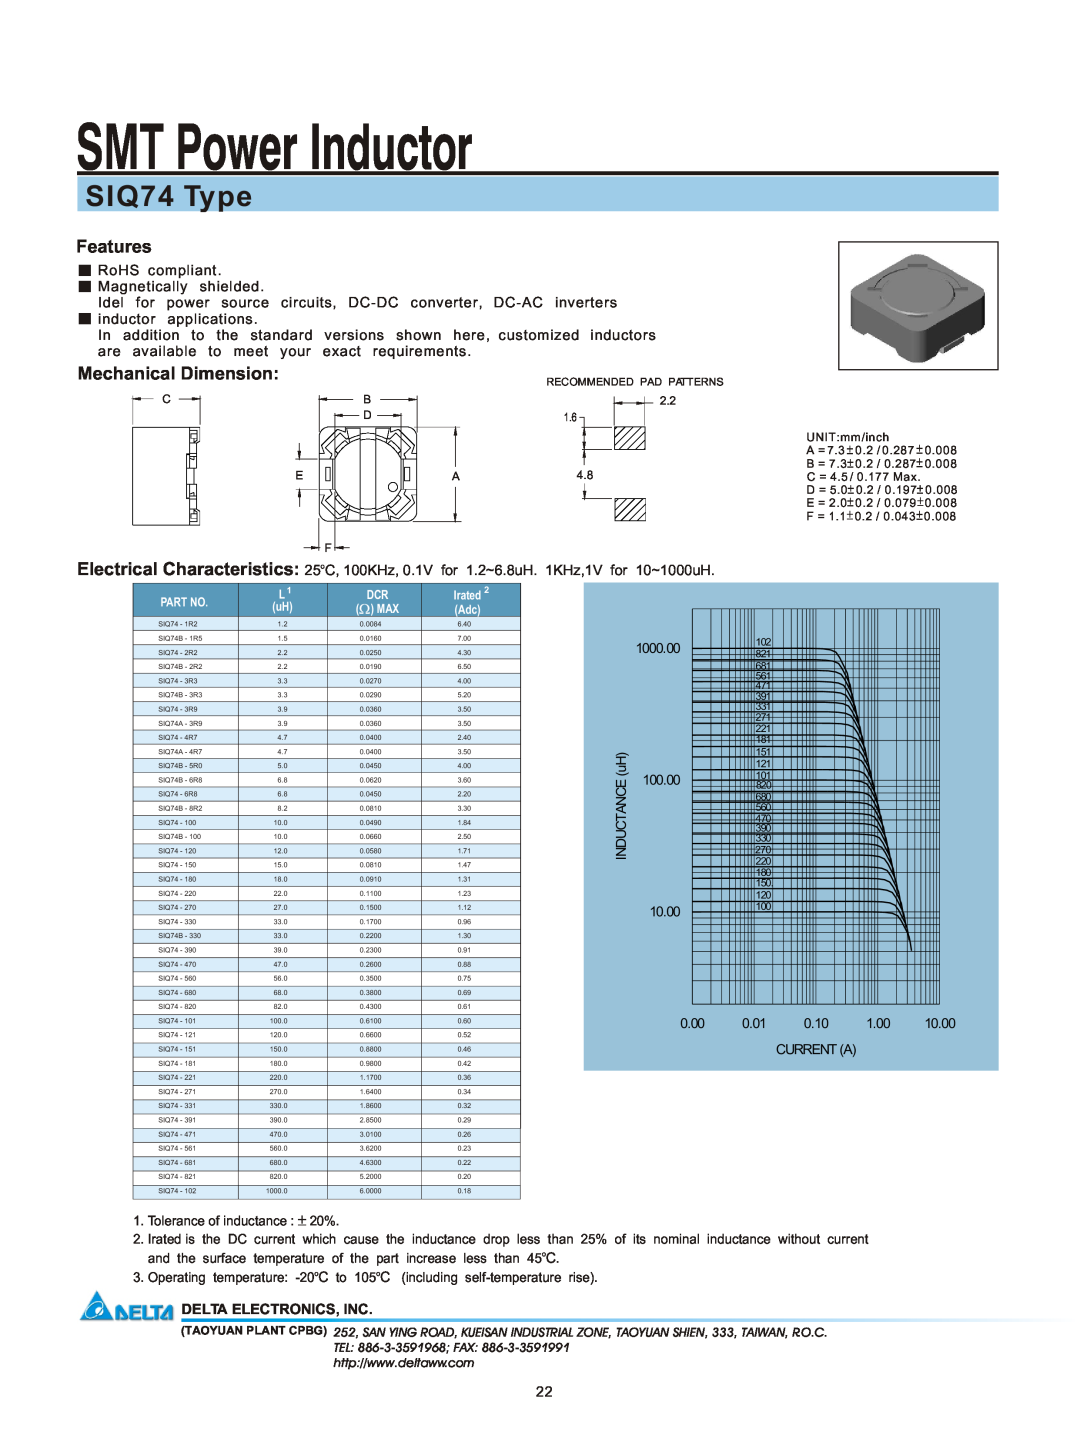 Delta Electronics manual SMT Power Inductor, SIQ74 Type, Features, Mechanical Dimension, Delta Electronics, Inc 